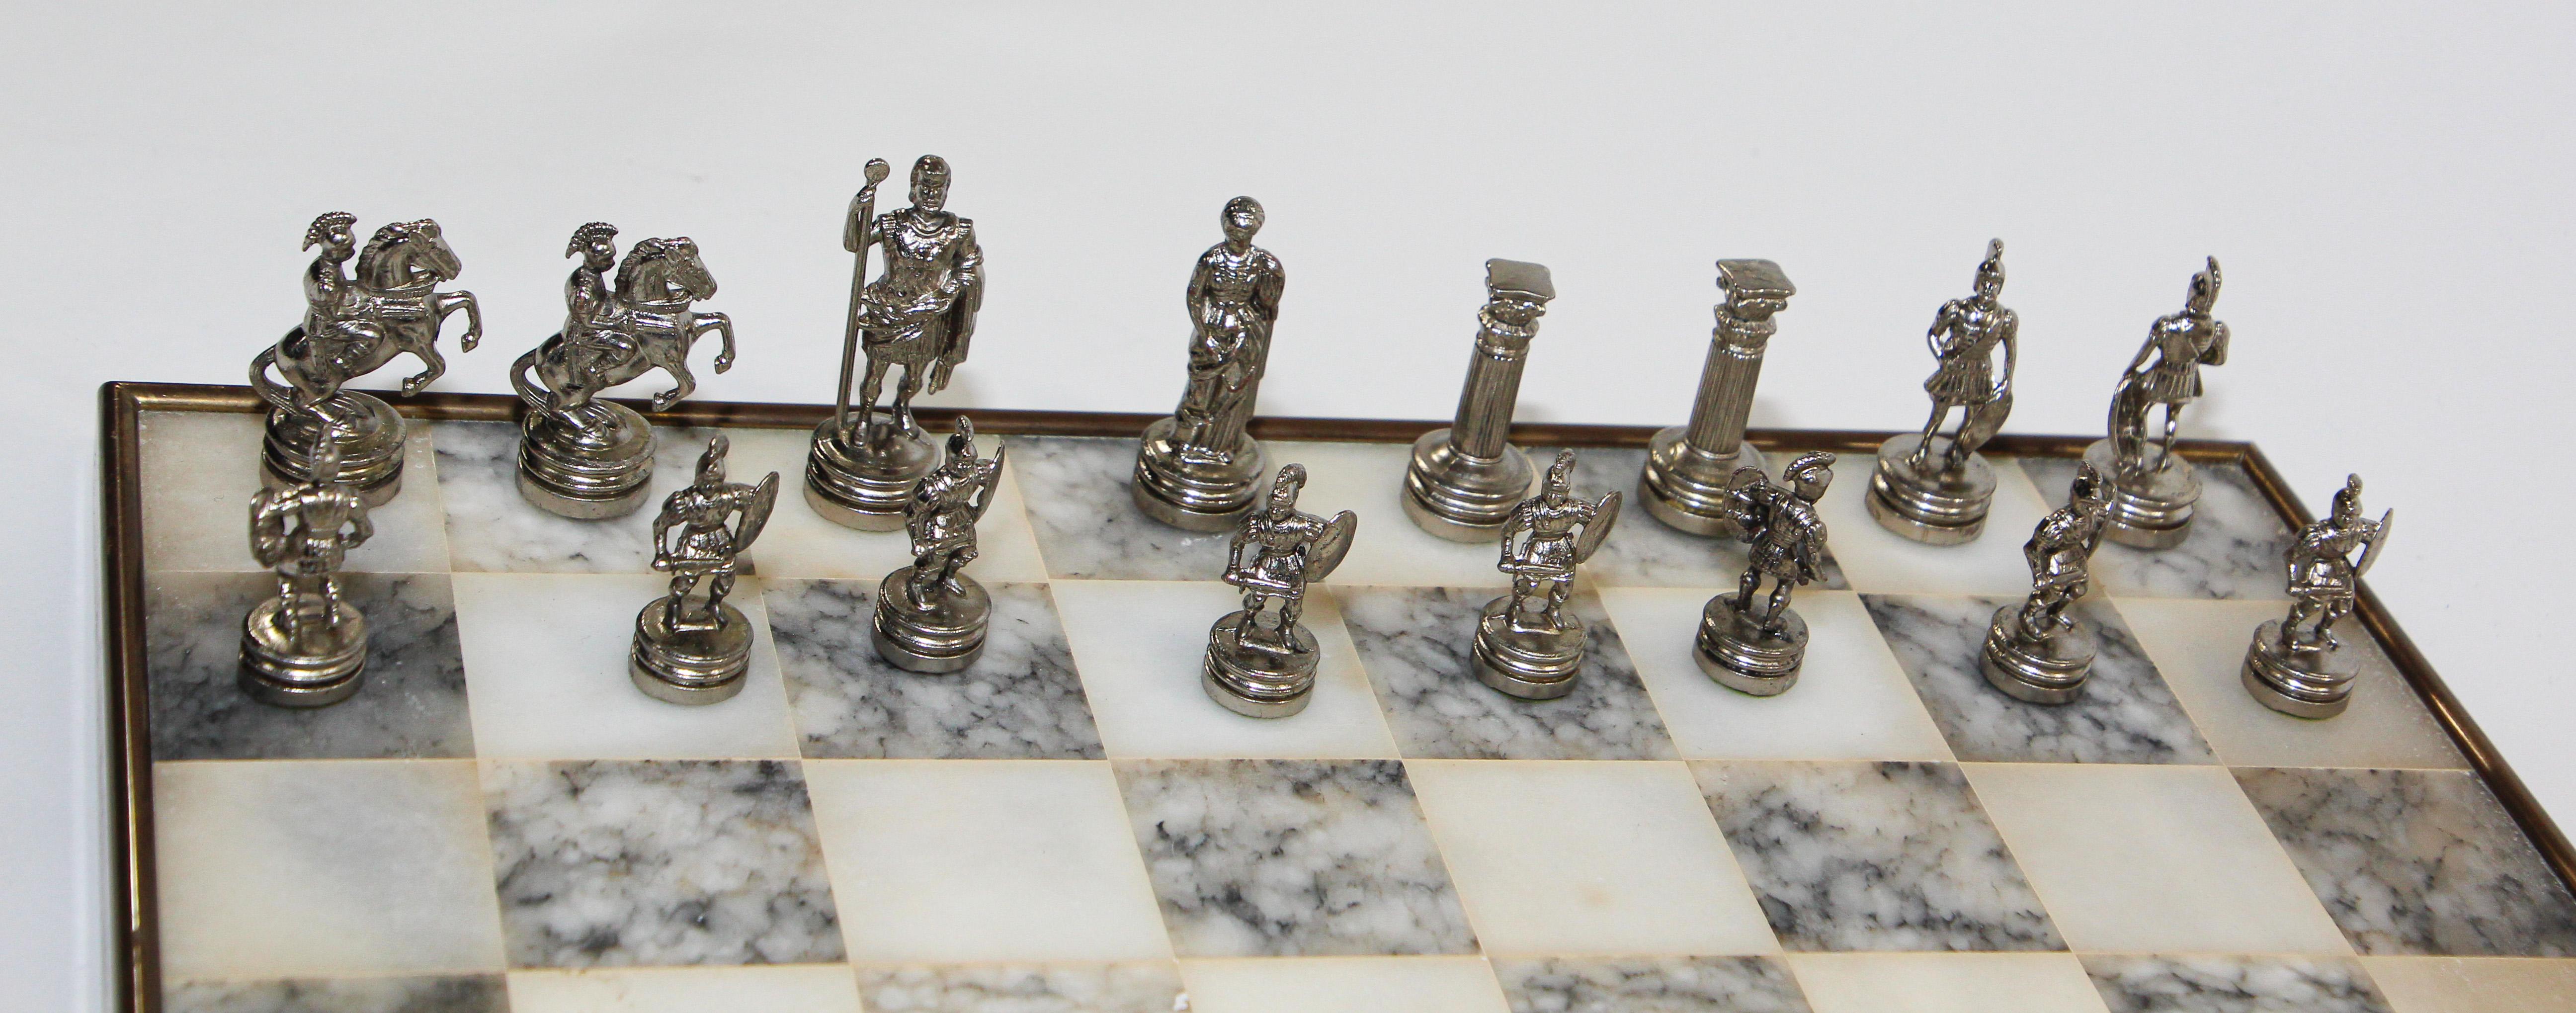 Vintage Marble Chess Board with Metal Greek against Roman Chess Pieces 1